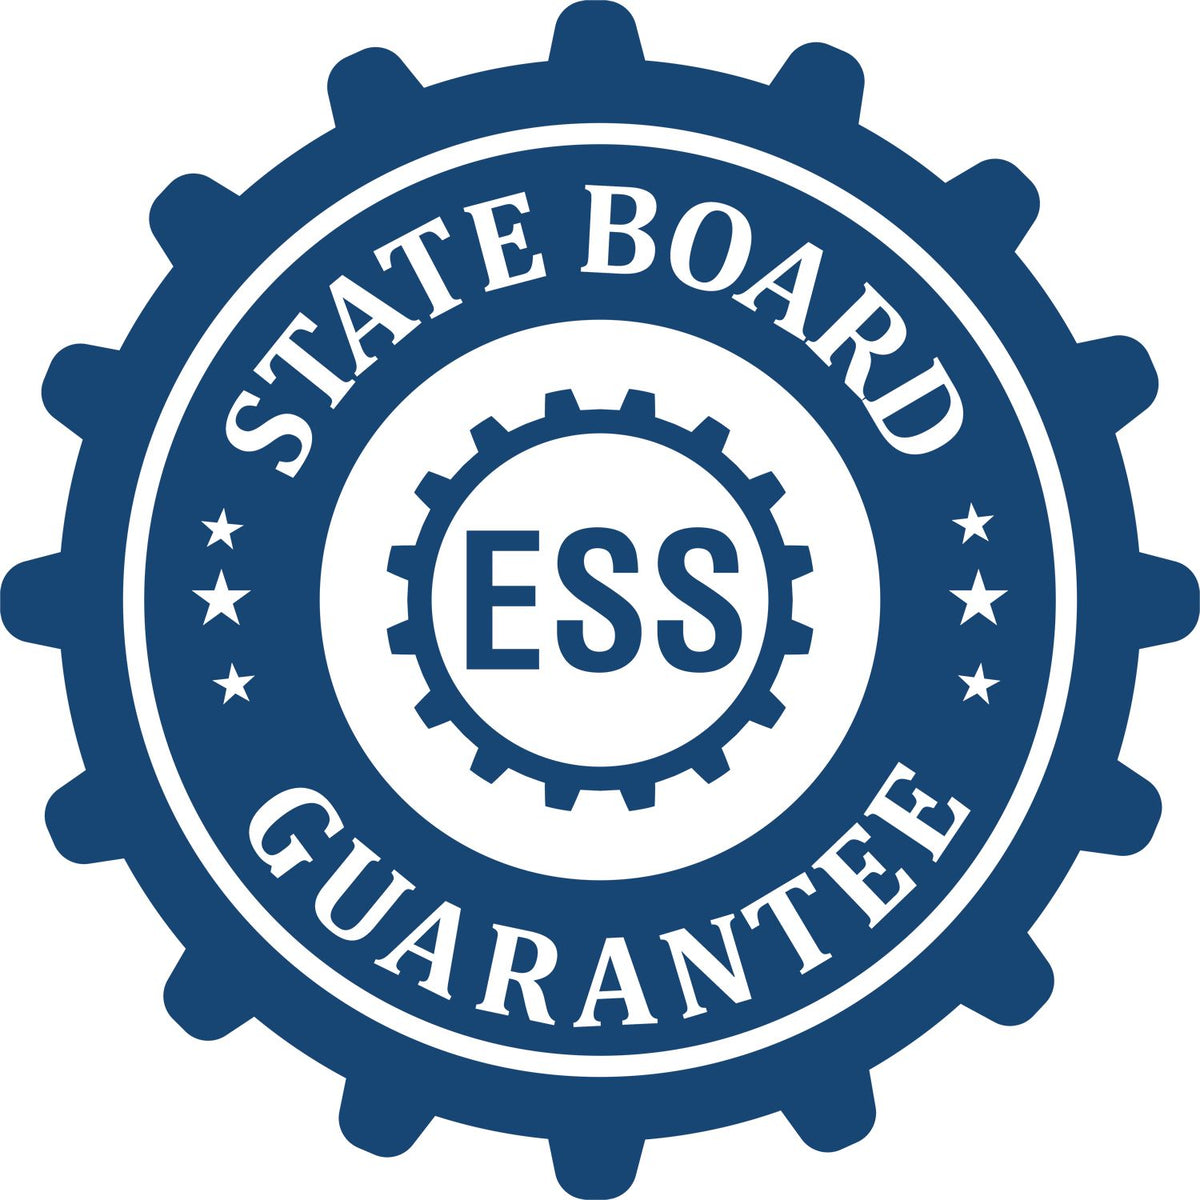 An emblem in a gear shape illustrating a state board guarantee for the Louisiana Professional Engineer Seal Stamp product.